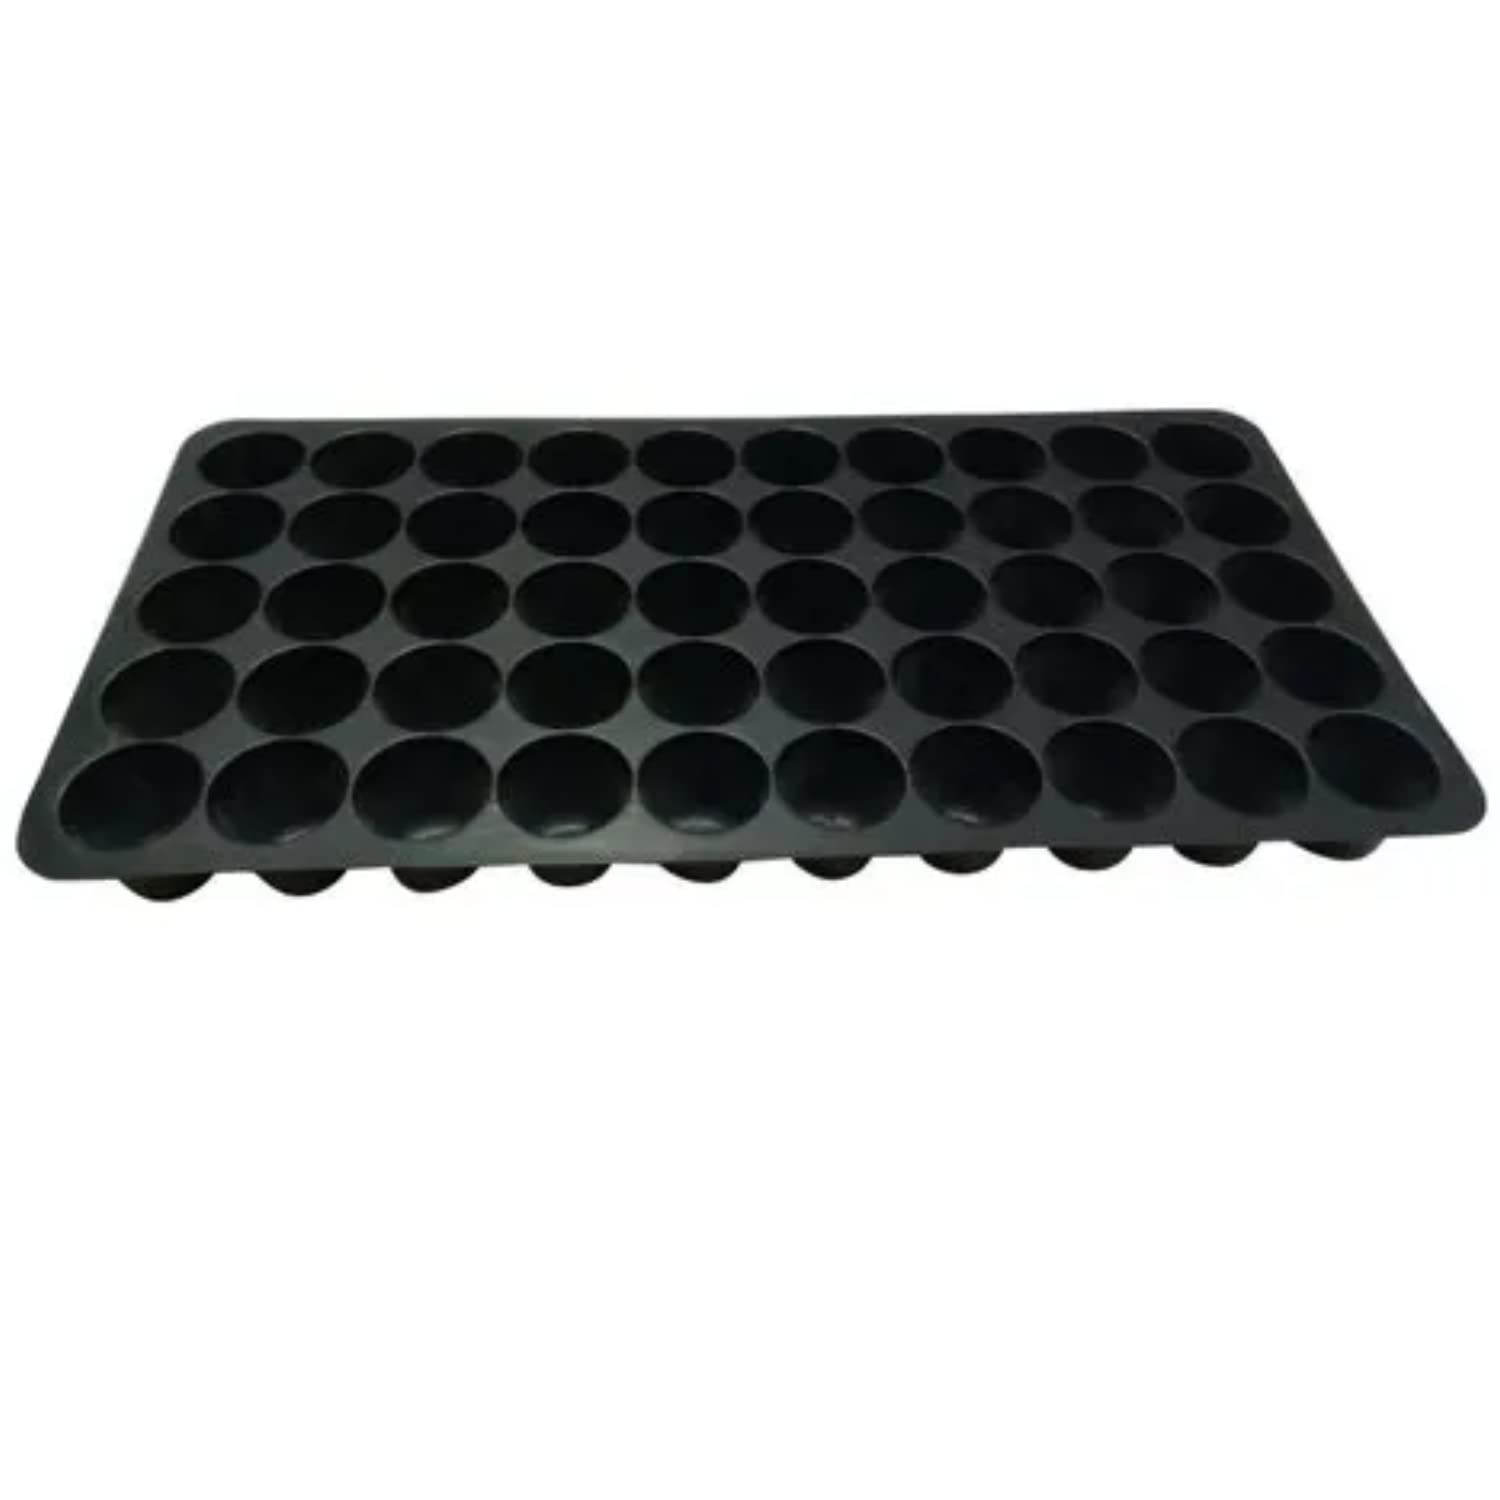 Hug A Plant |Seedling Nursery Tray with 50 Cavity for Home & Garden (Pack of 5)